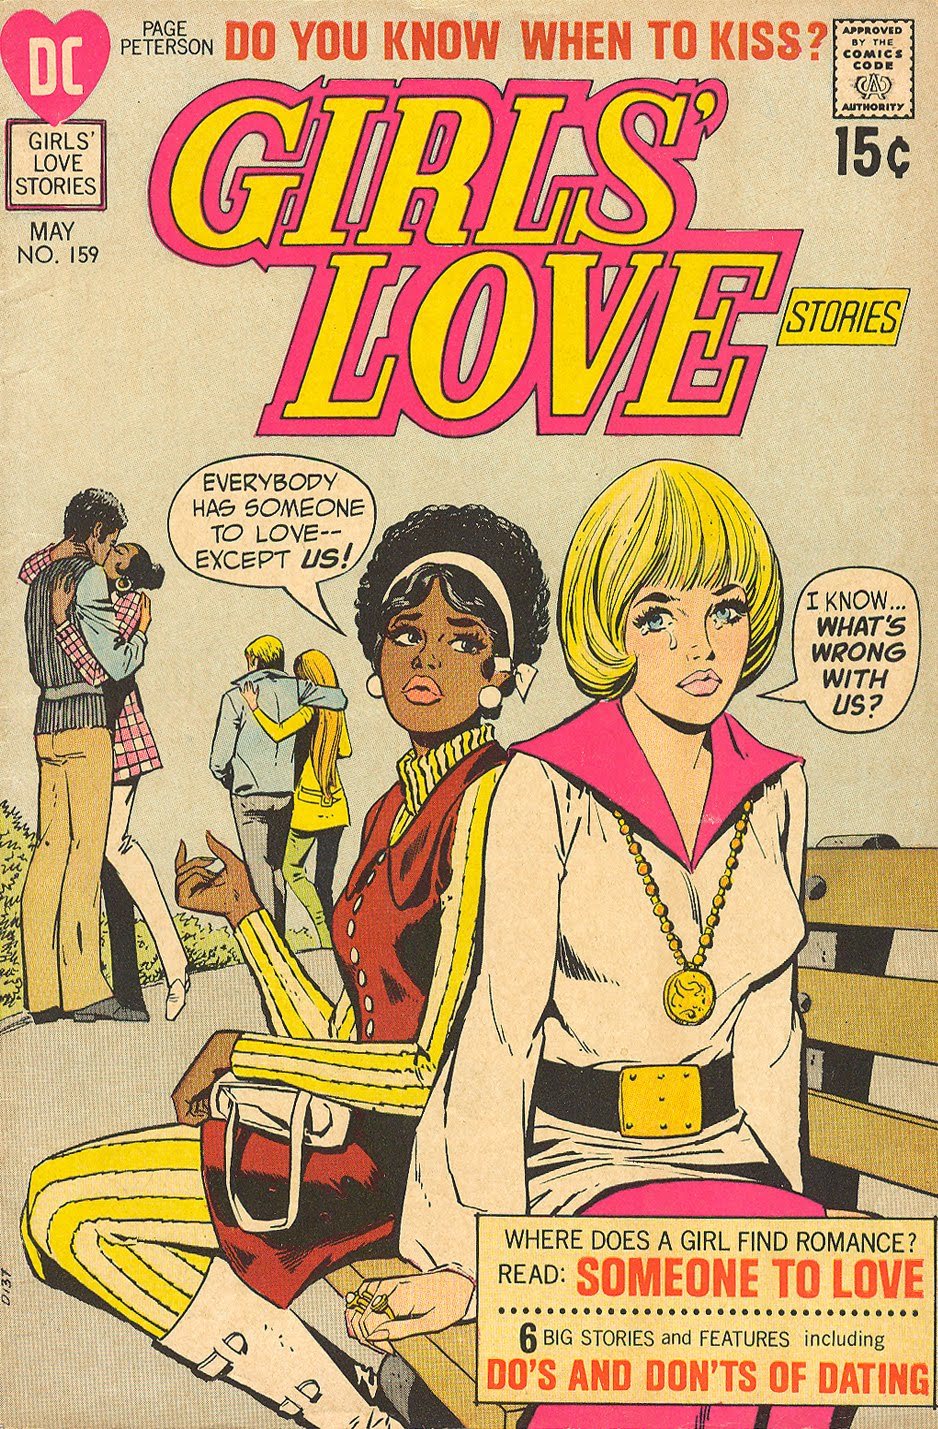 A history of the growth of romance comic books